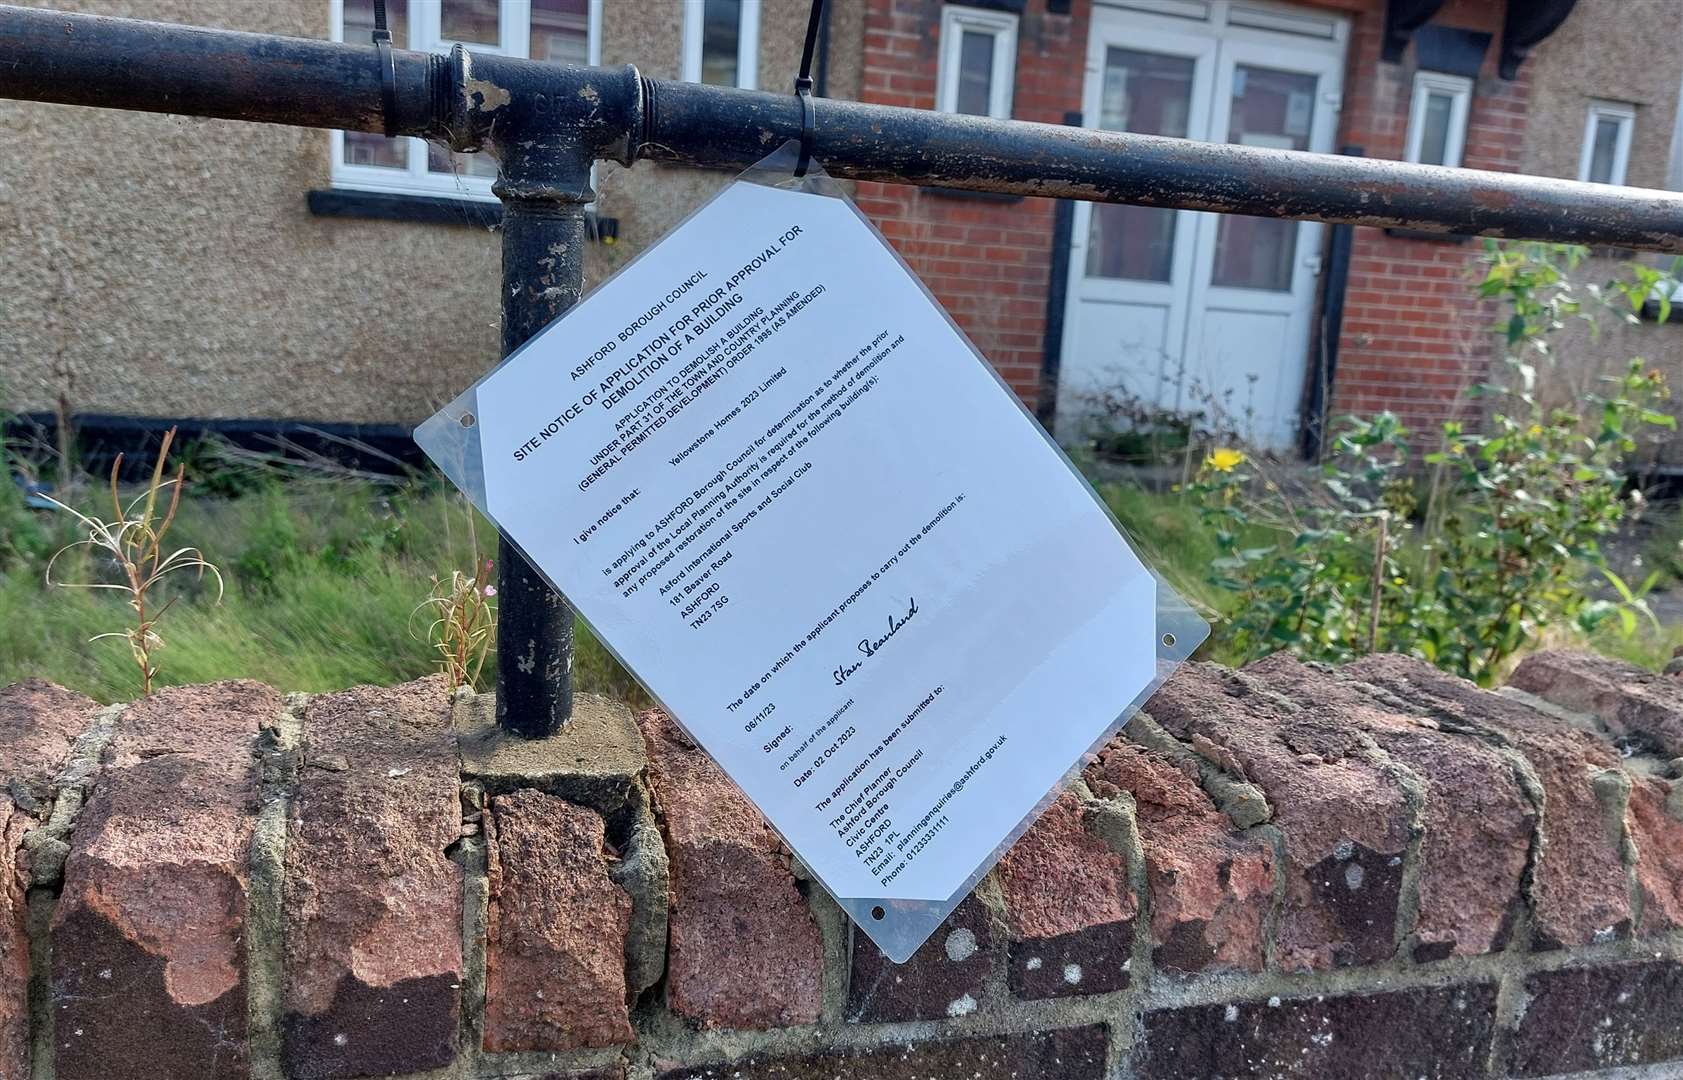 A demolition notice to knock down the social club has been put forward